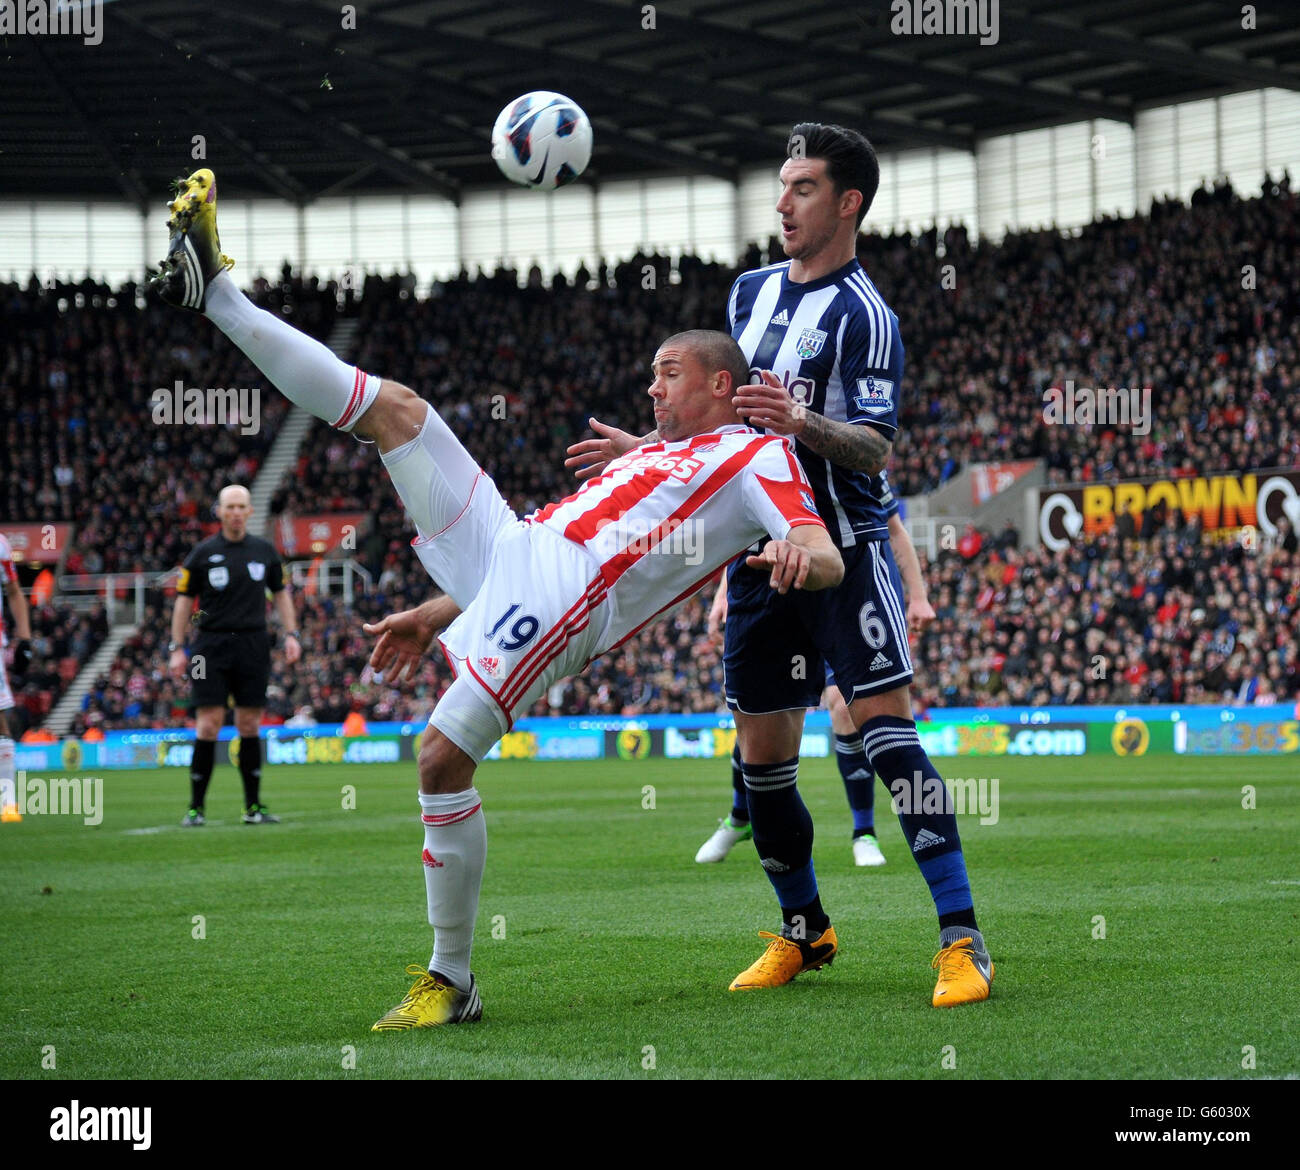 Stoke City's Jon Walters ficks the ball over the head of West Bromwich Albion's Liam Ridgewell during the Barclays Premier League match at the Britannia Stadium, Stoke. Stock Photo